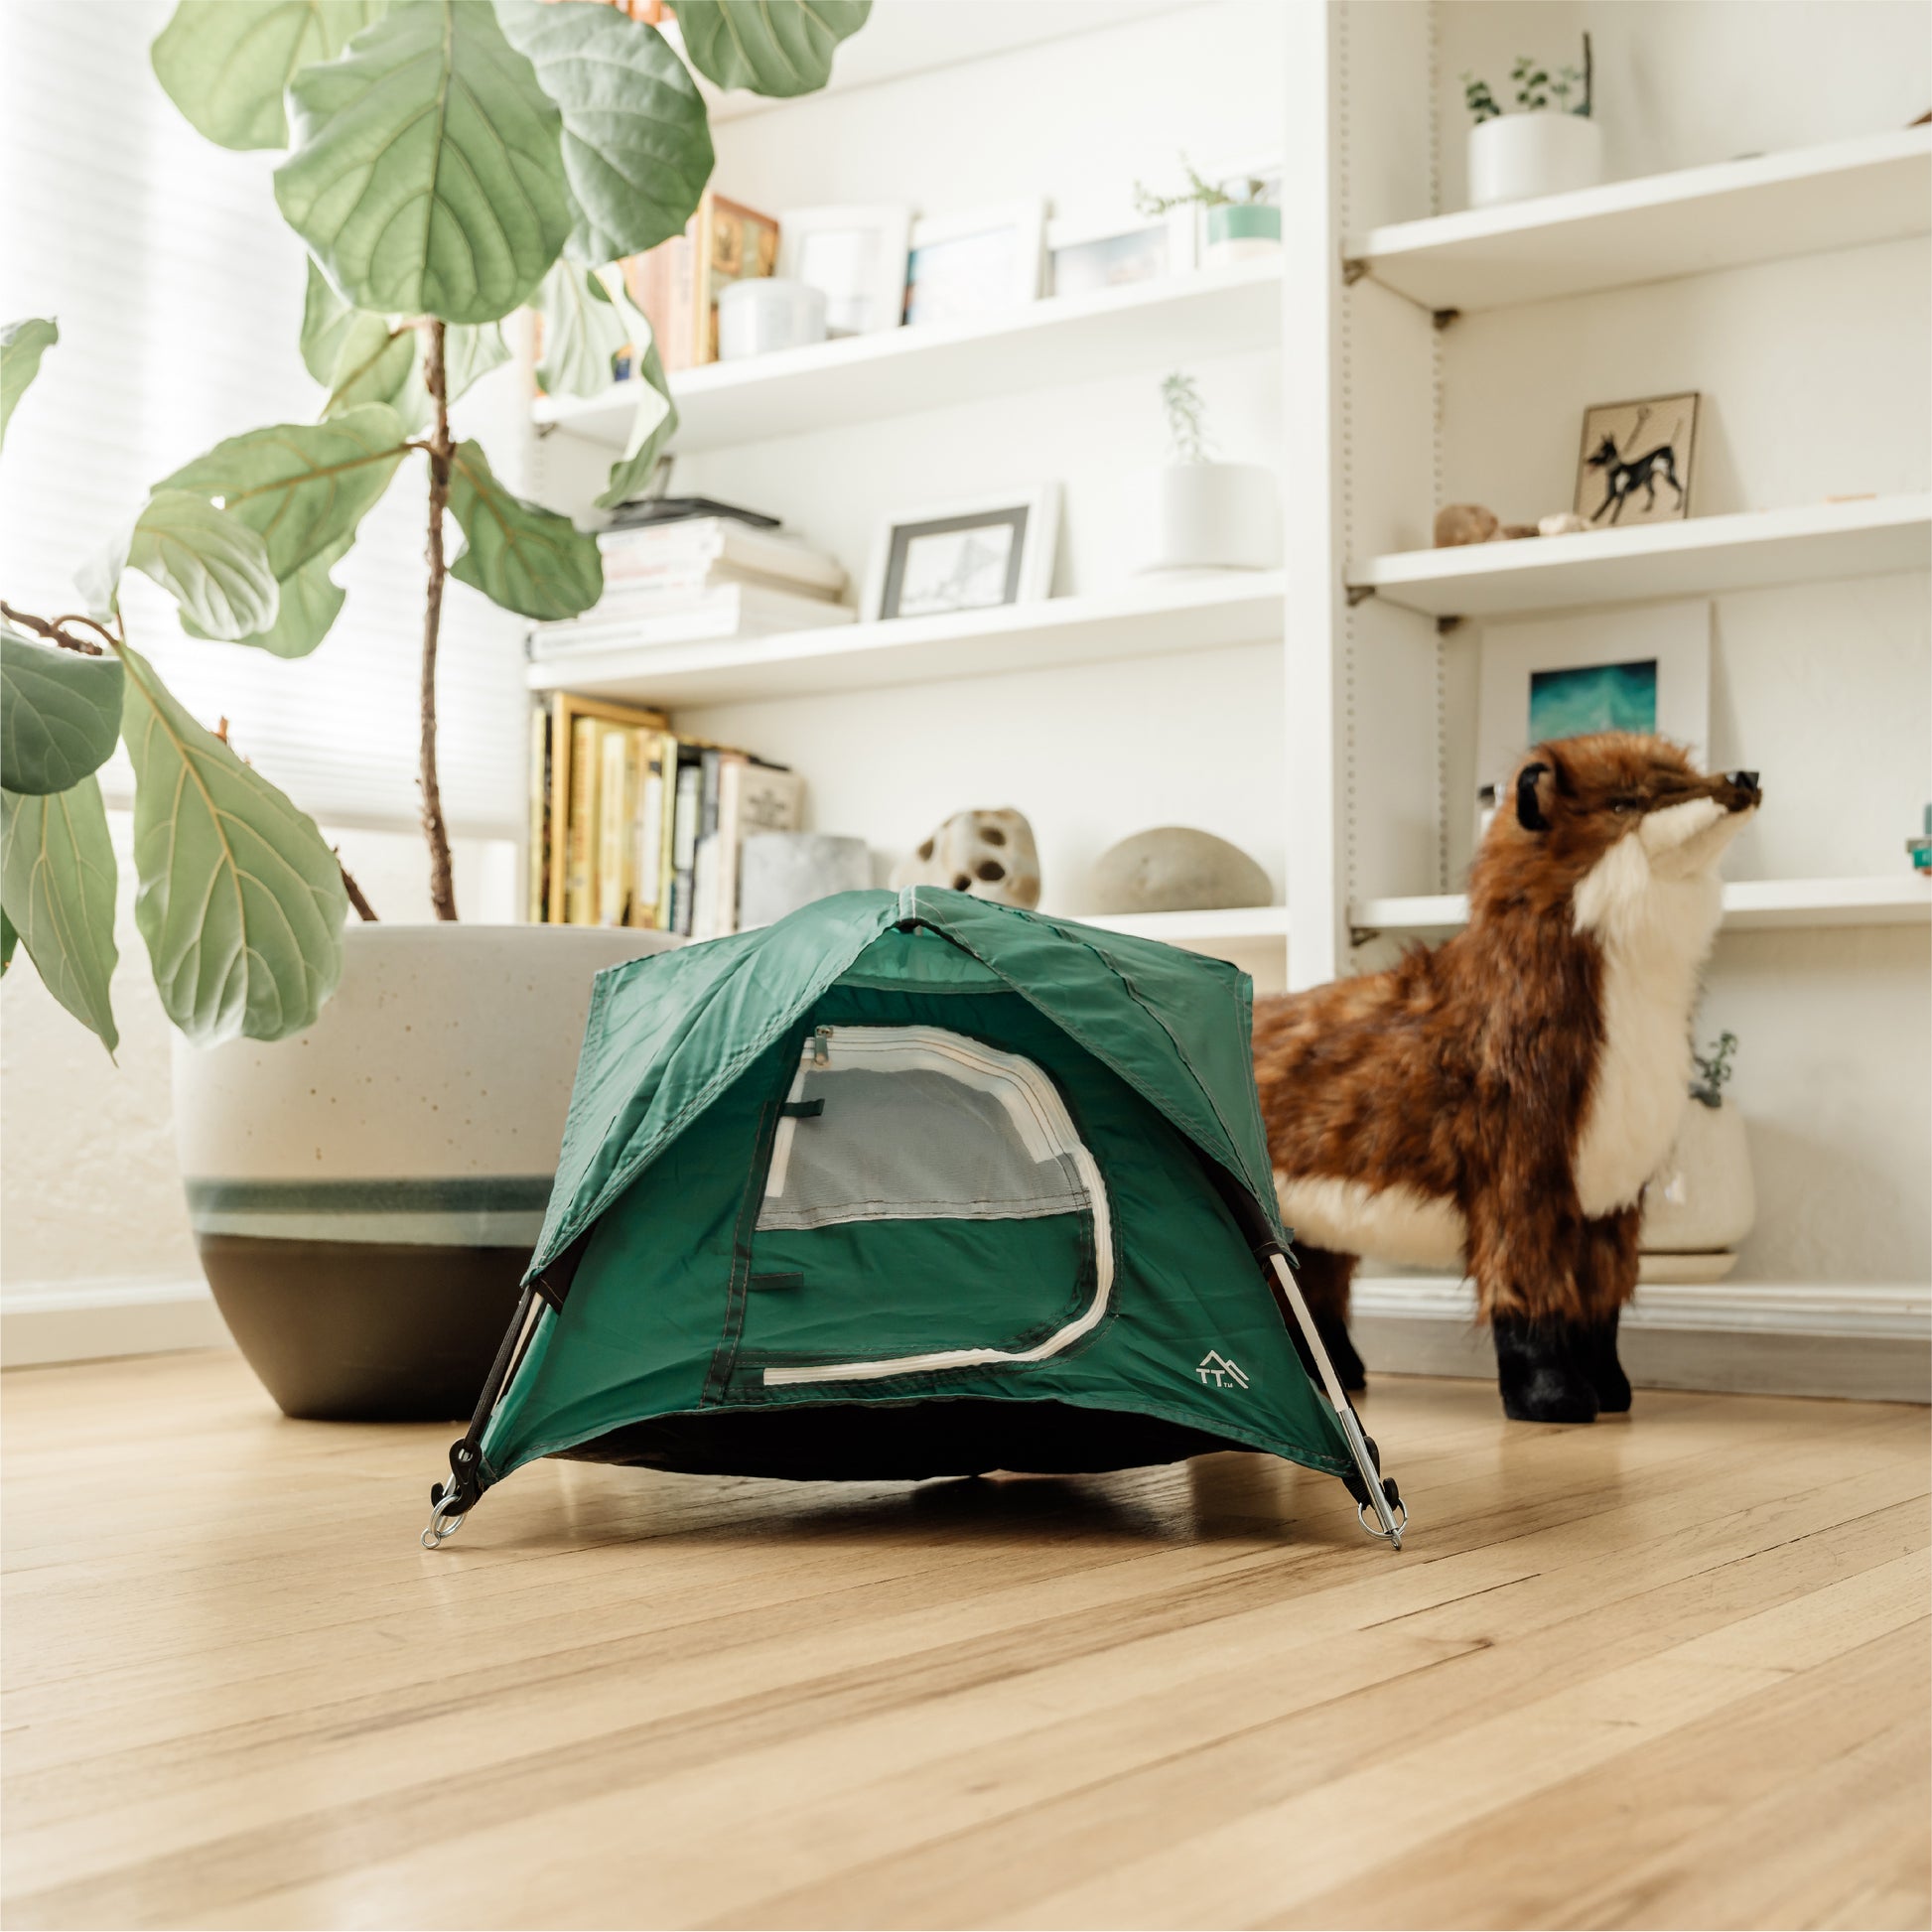 Green tiny tent shown in front of a bookshelf with a toy fox next to it.